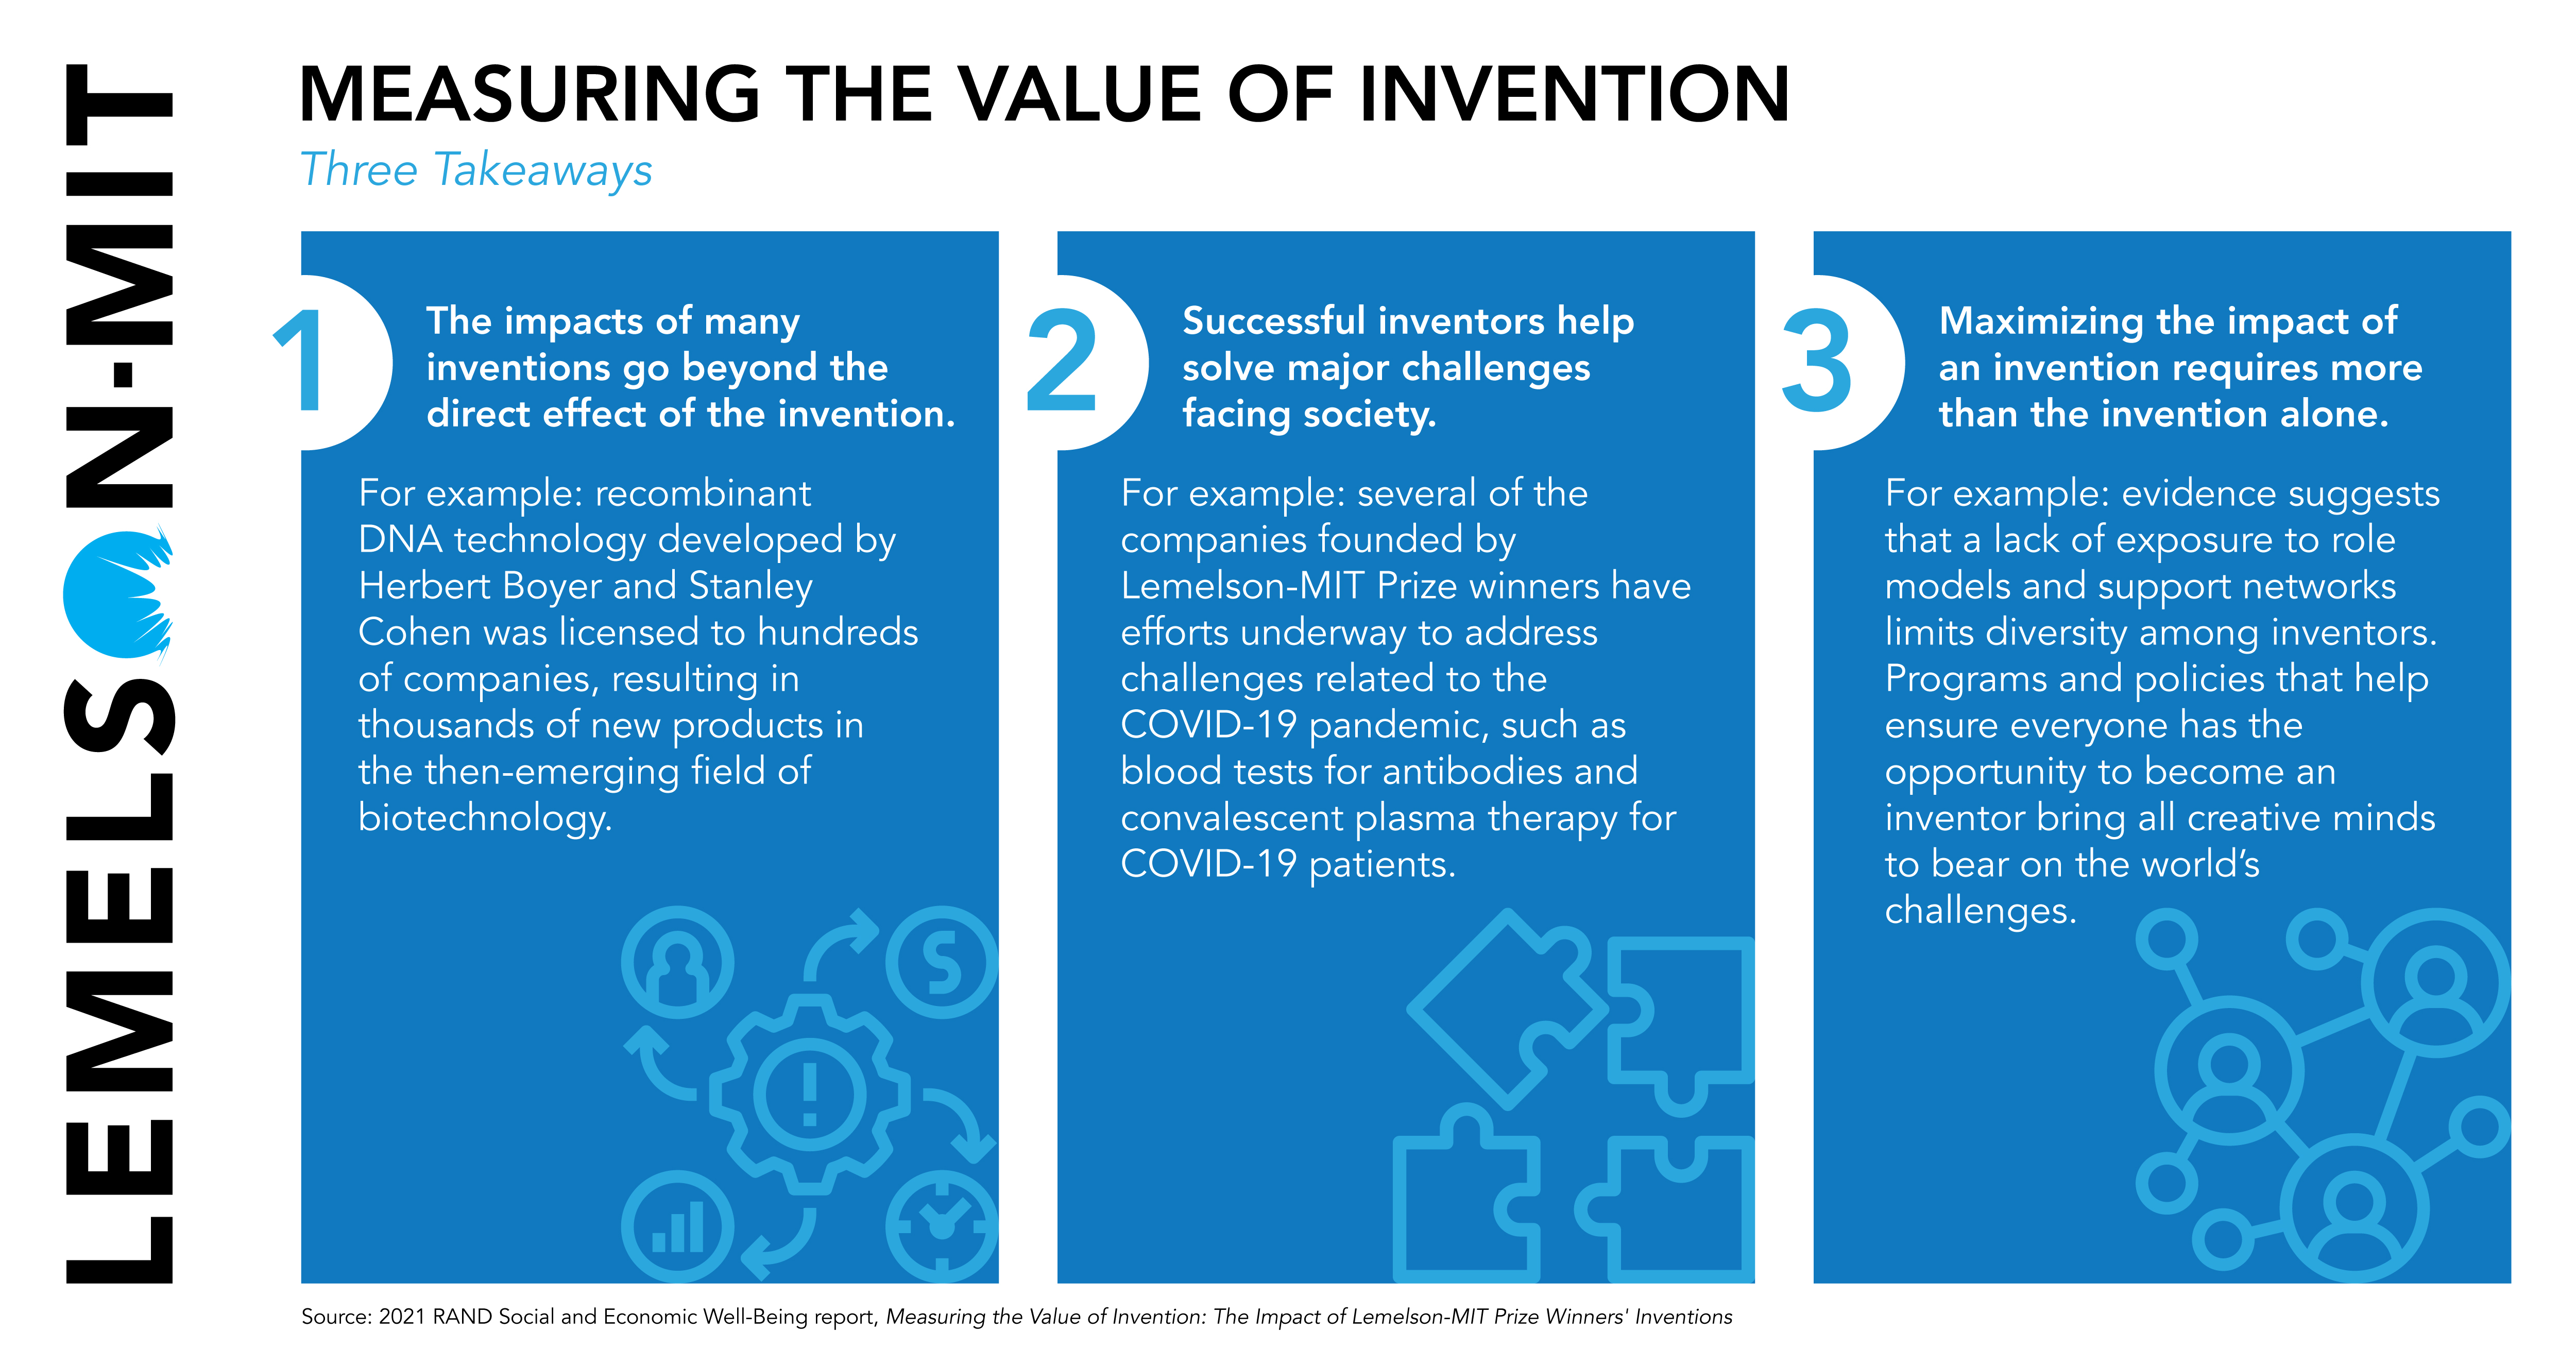 Three Take Aways from Measuring the Value of Invention